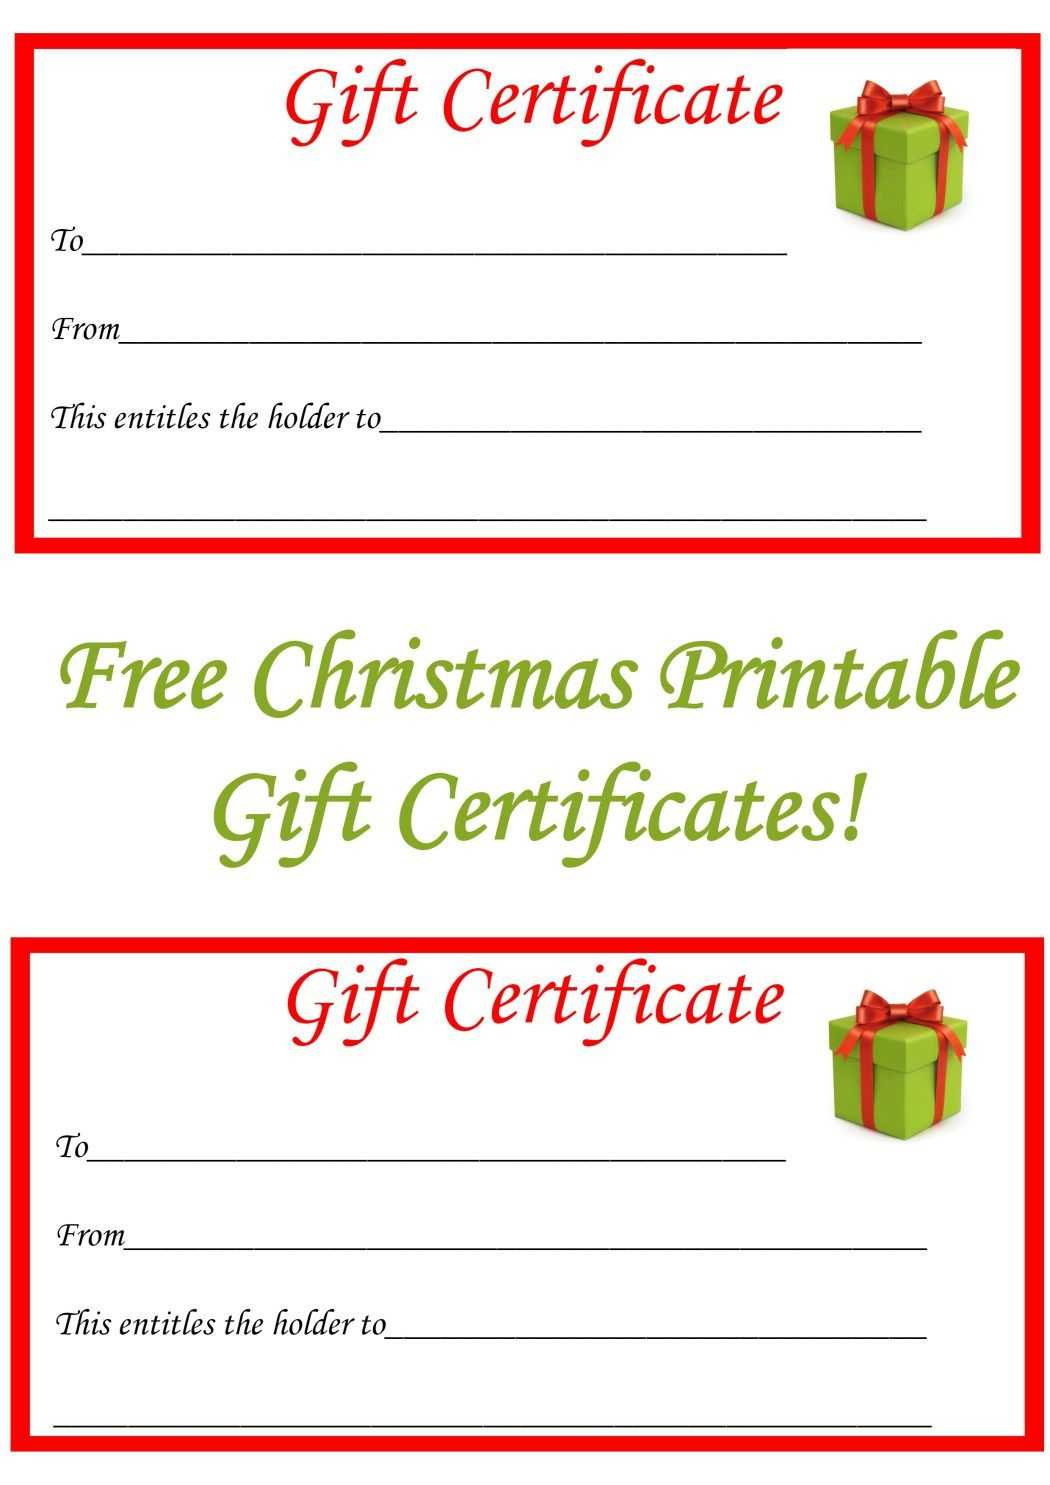 010 Template Ideas Blank Gift Astounding Certificate Intended For Christmas Gift Certificate Template Free Download